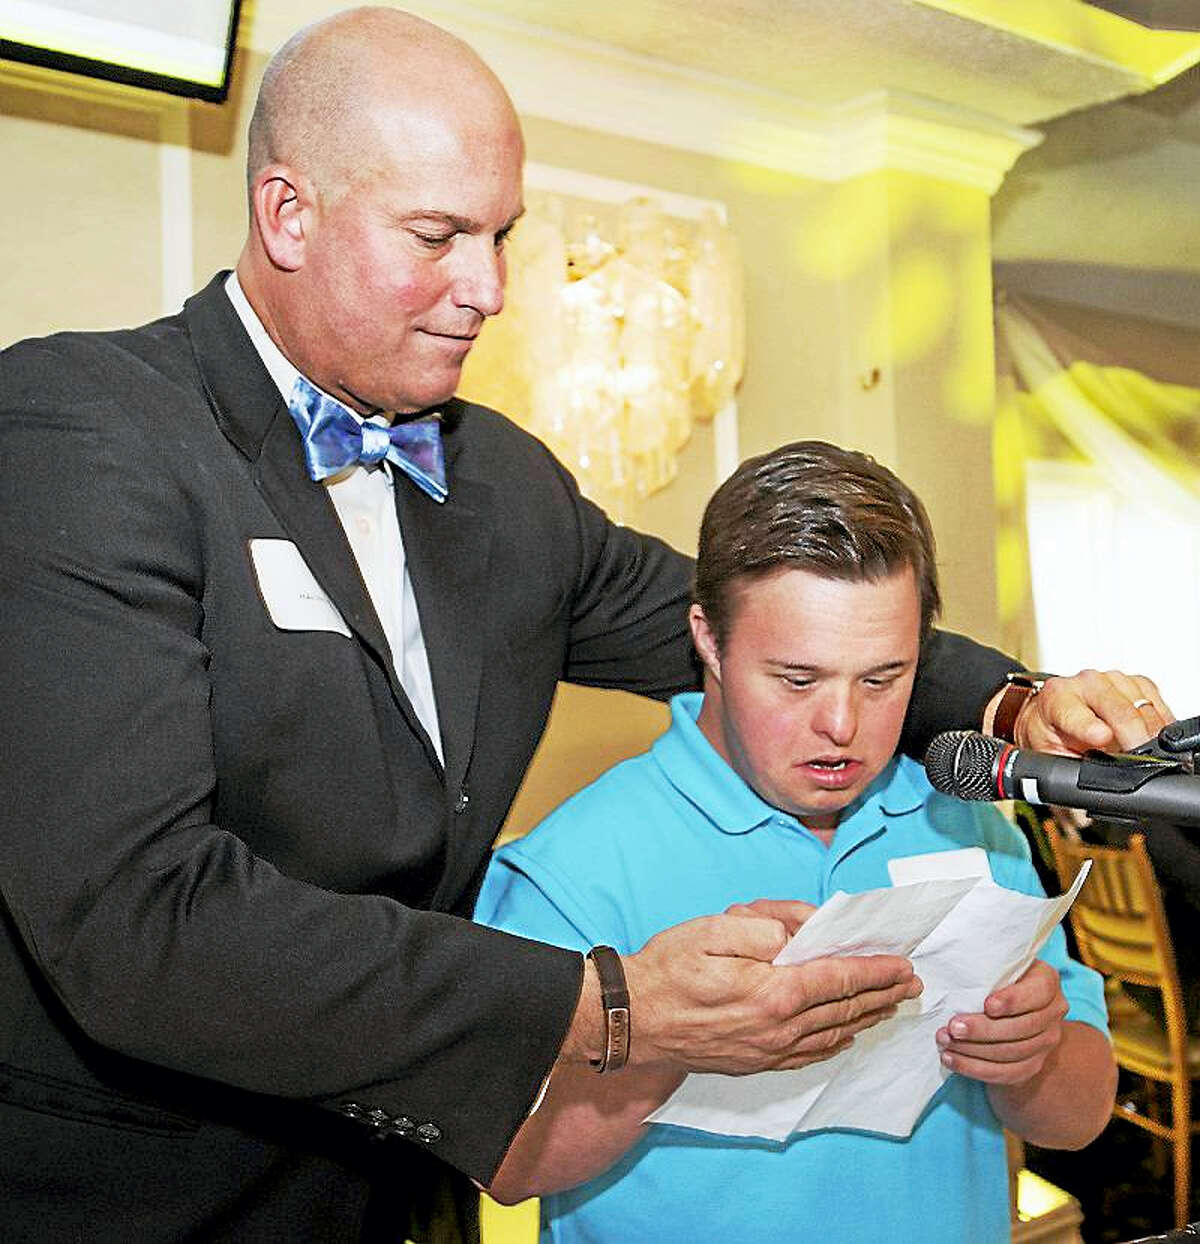 Chapel Haven president Mike Storz helps student Matthew Biles, who spoke at the organization’s annual brunch, where a major capital campaign was formally announced in order to carry out a major expansion and modernization of the campus.